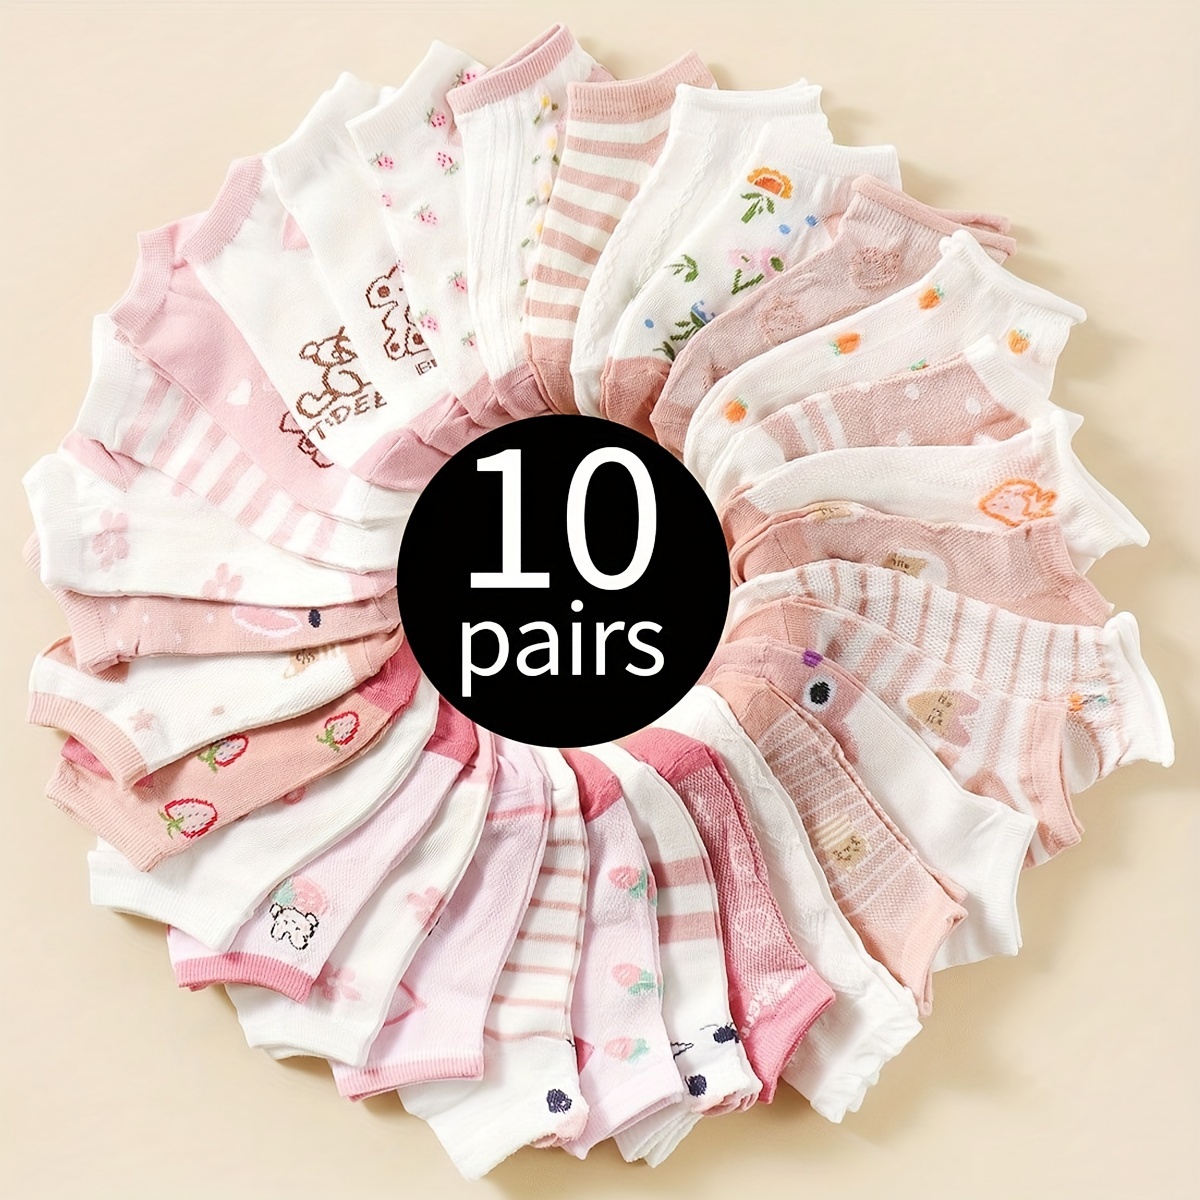 

10 Pairs Of Teenager's Fashion Cute Pattern Low-cut Socks, Comfy Breathable Casual Socks For Daily Wearing